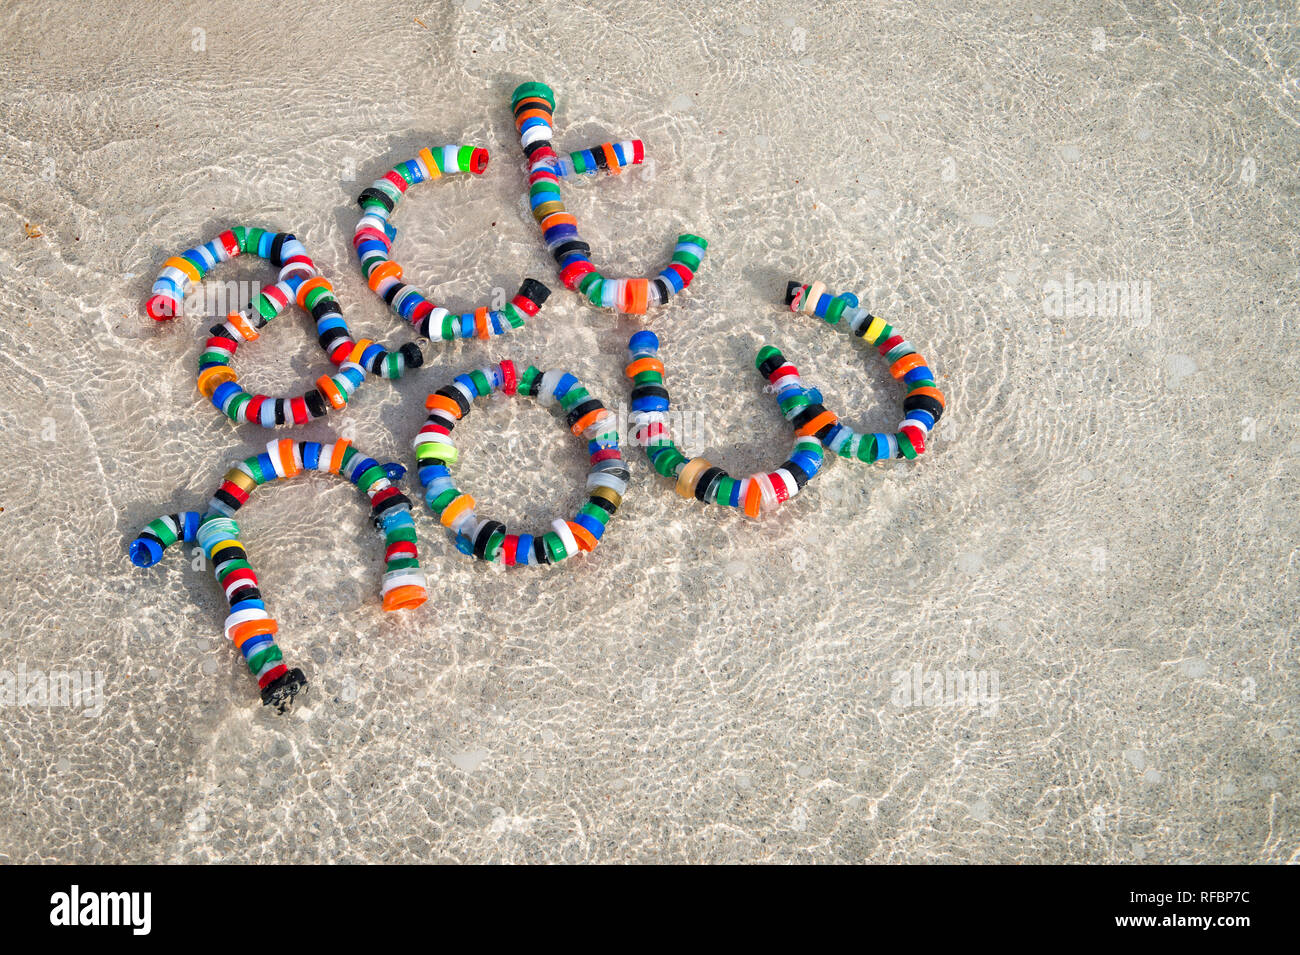 Colorful plastic bottle caps spell out 'act now' on a sandy beach with lapping waves, a reminder for people to take action, reduce, reuse and recycle, Stock Photo